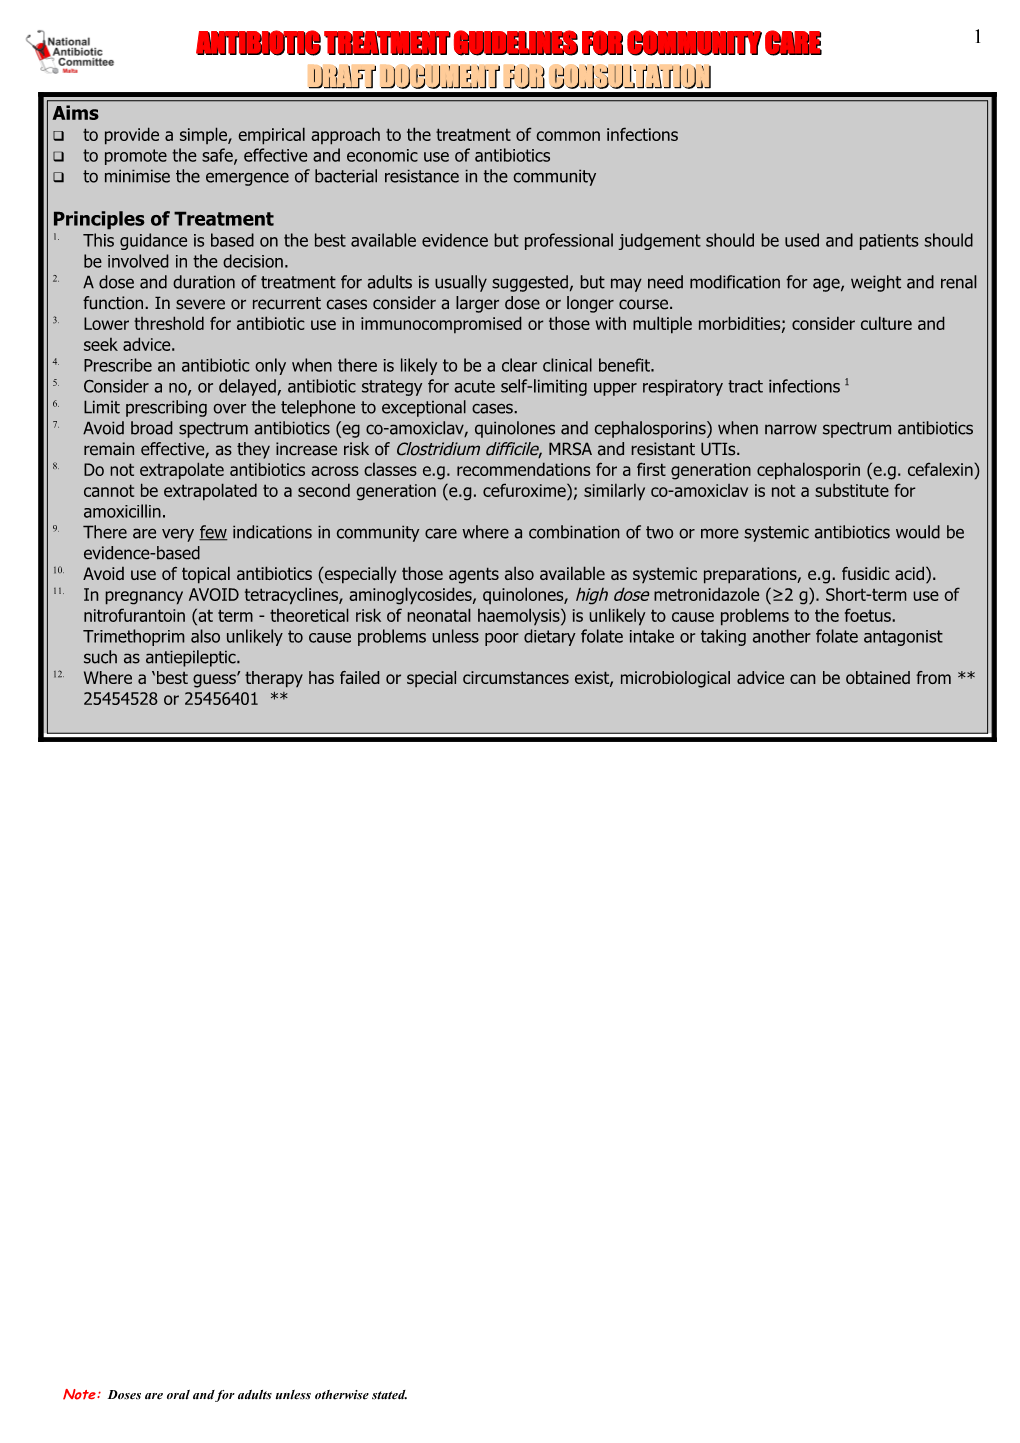 Management of Infection Guidance for Primary Care